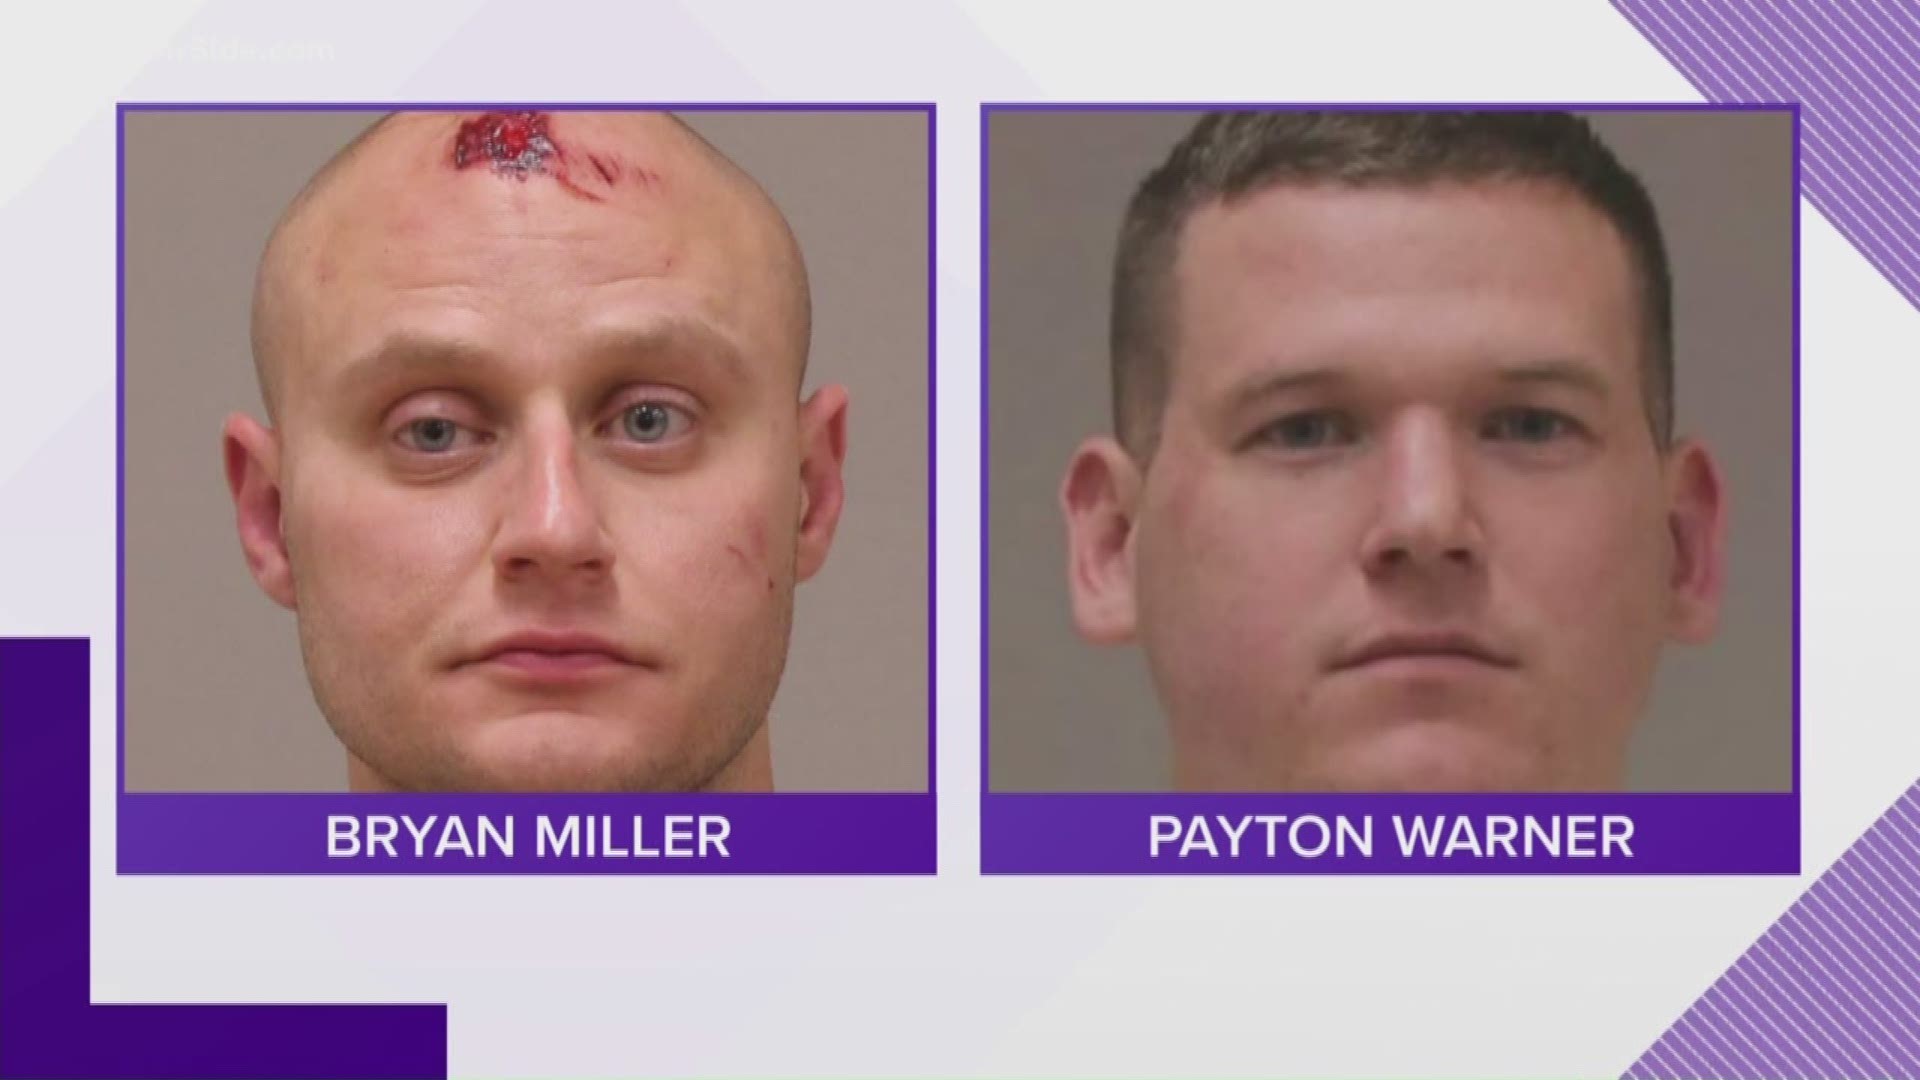 Two Bath Township police officers were arrested after a fight broke out at a Grand Rapids bar. They are now facing charges related to that brawl.